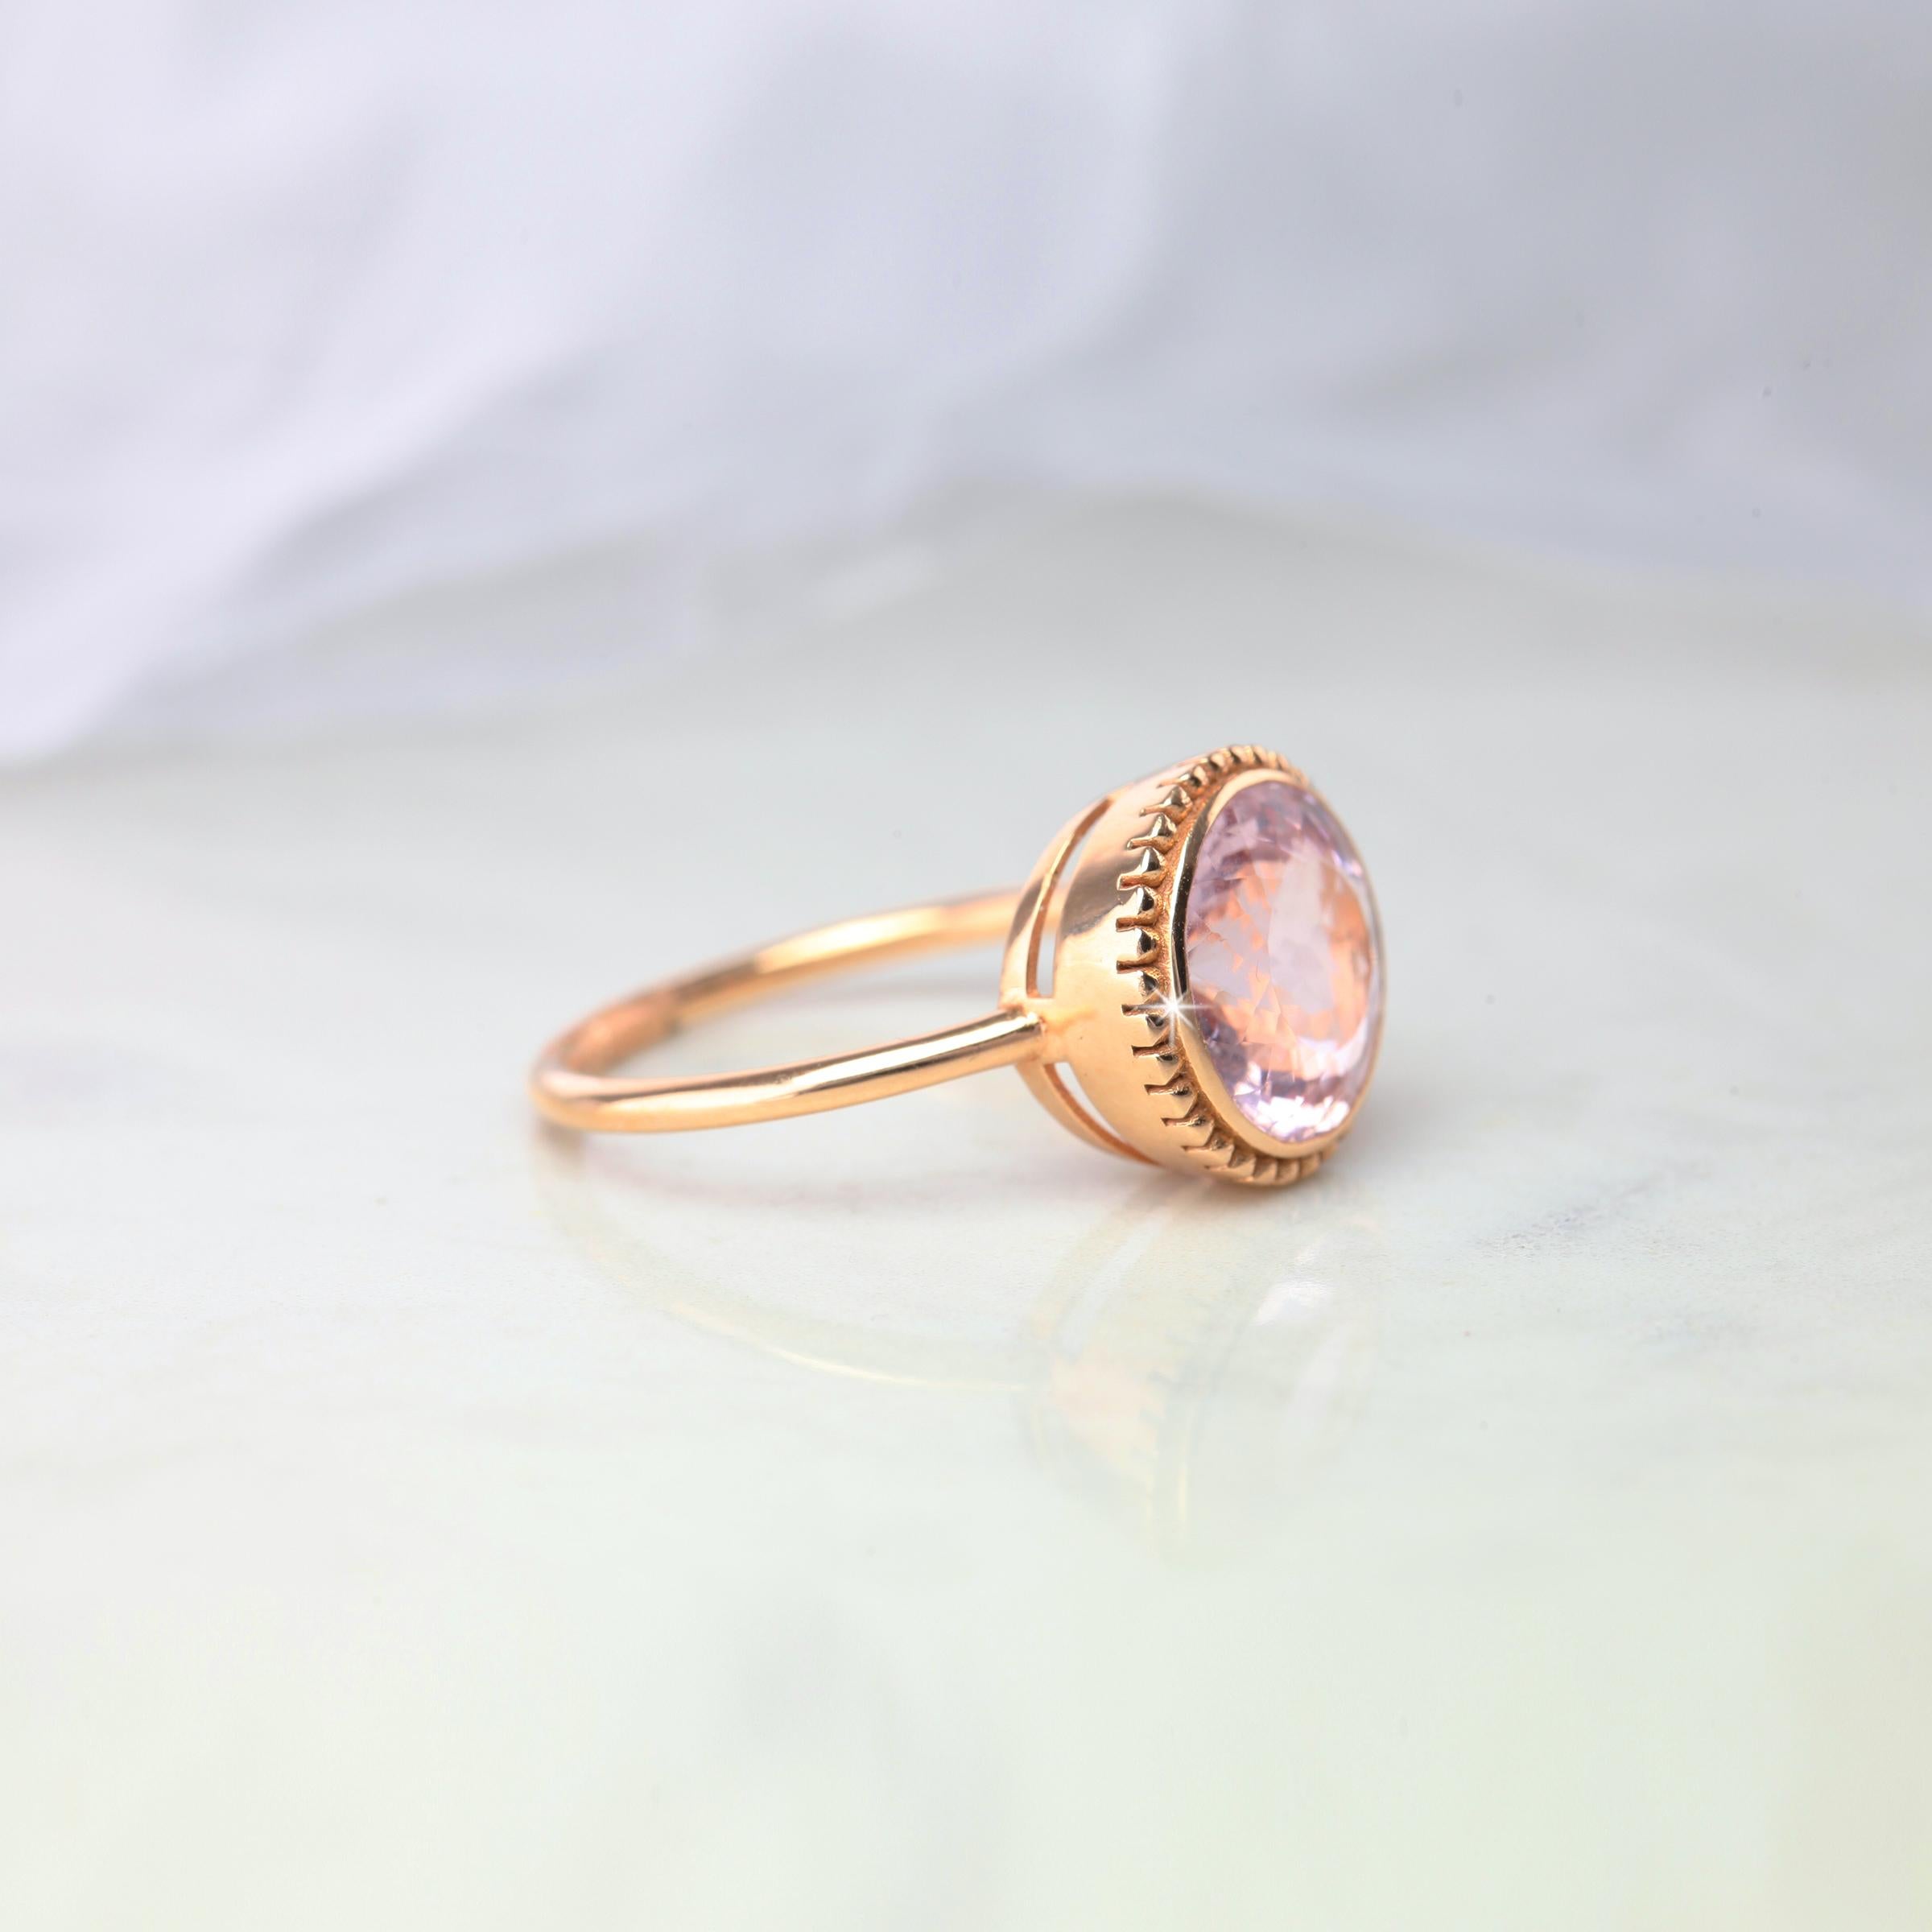 Vintage Style Morganite Ring, Vintage Dainty Round Morganite Ring 14 Carat Rosegold , Engagement Ring, Solitaire Ring, Statement Ring created by hands from ring to the stone shapes. 

I used brillant round shape to reveal morganite stone. I